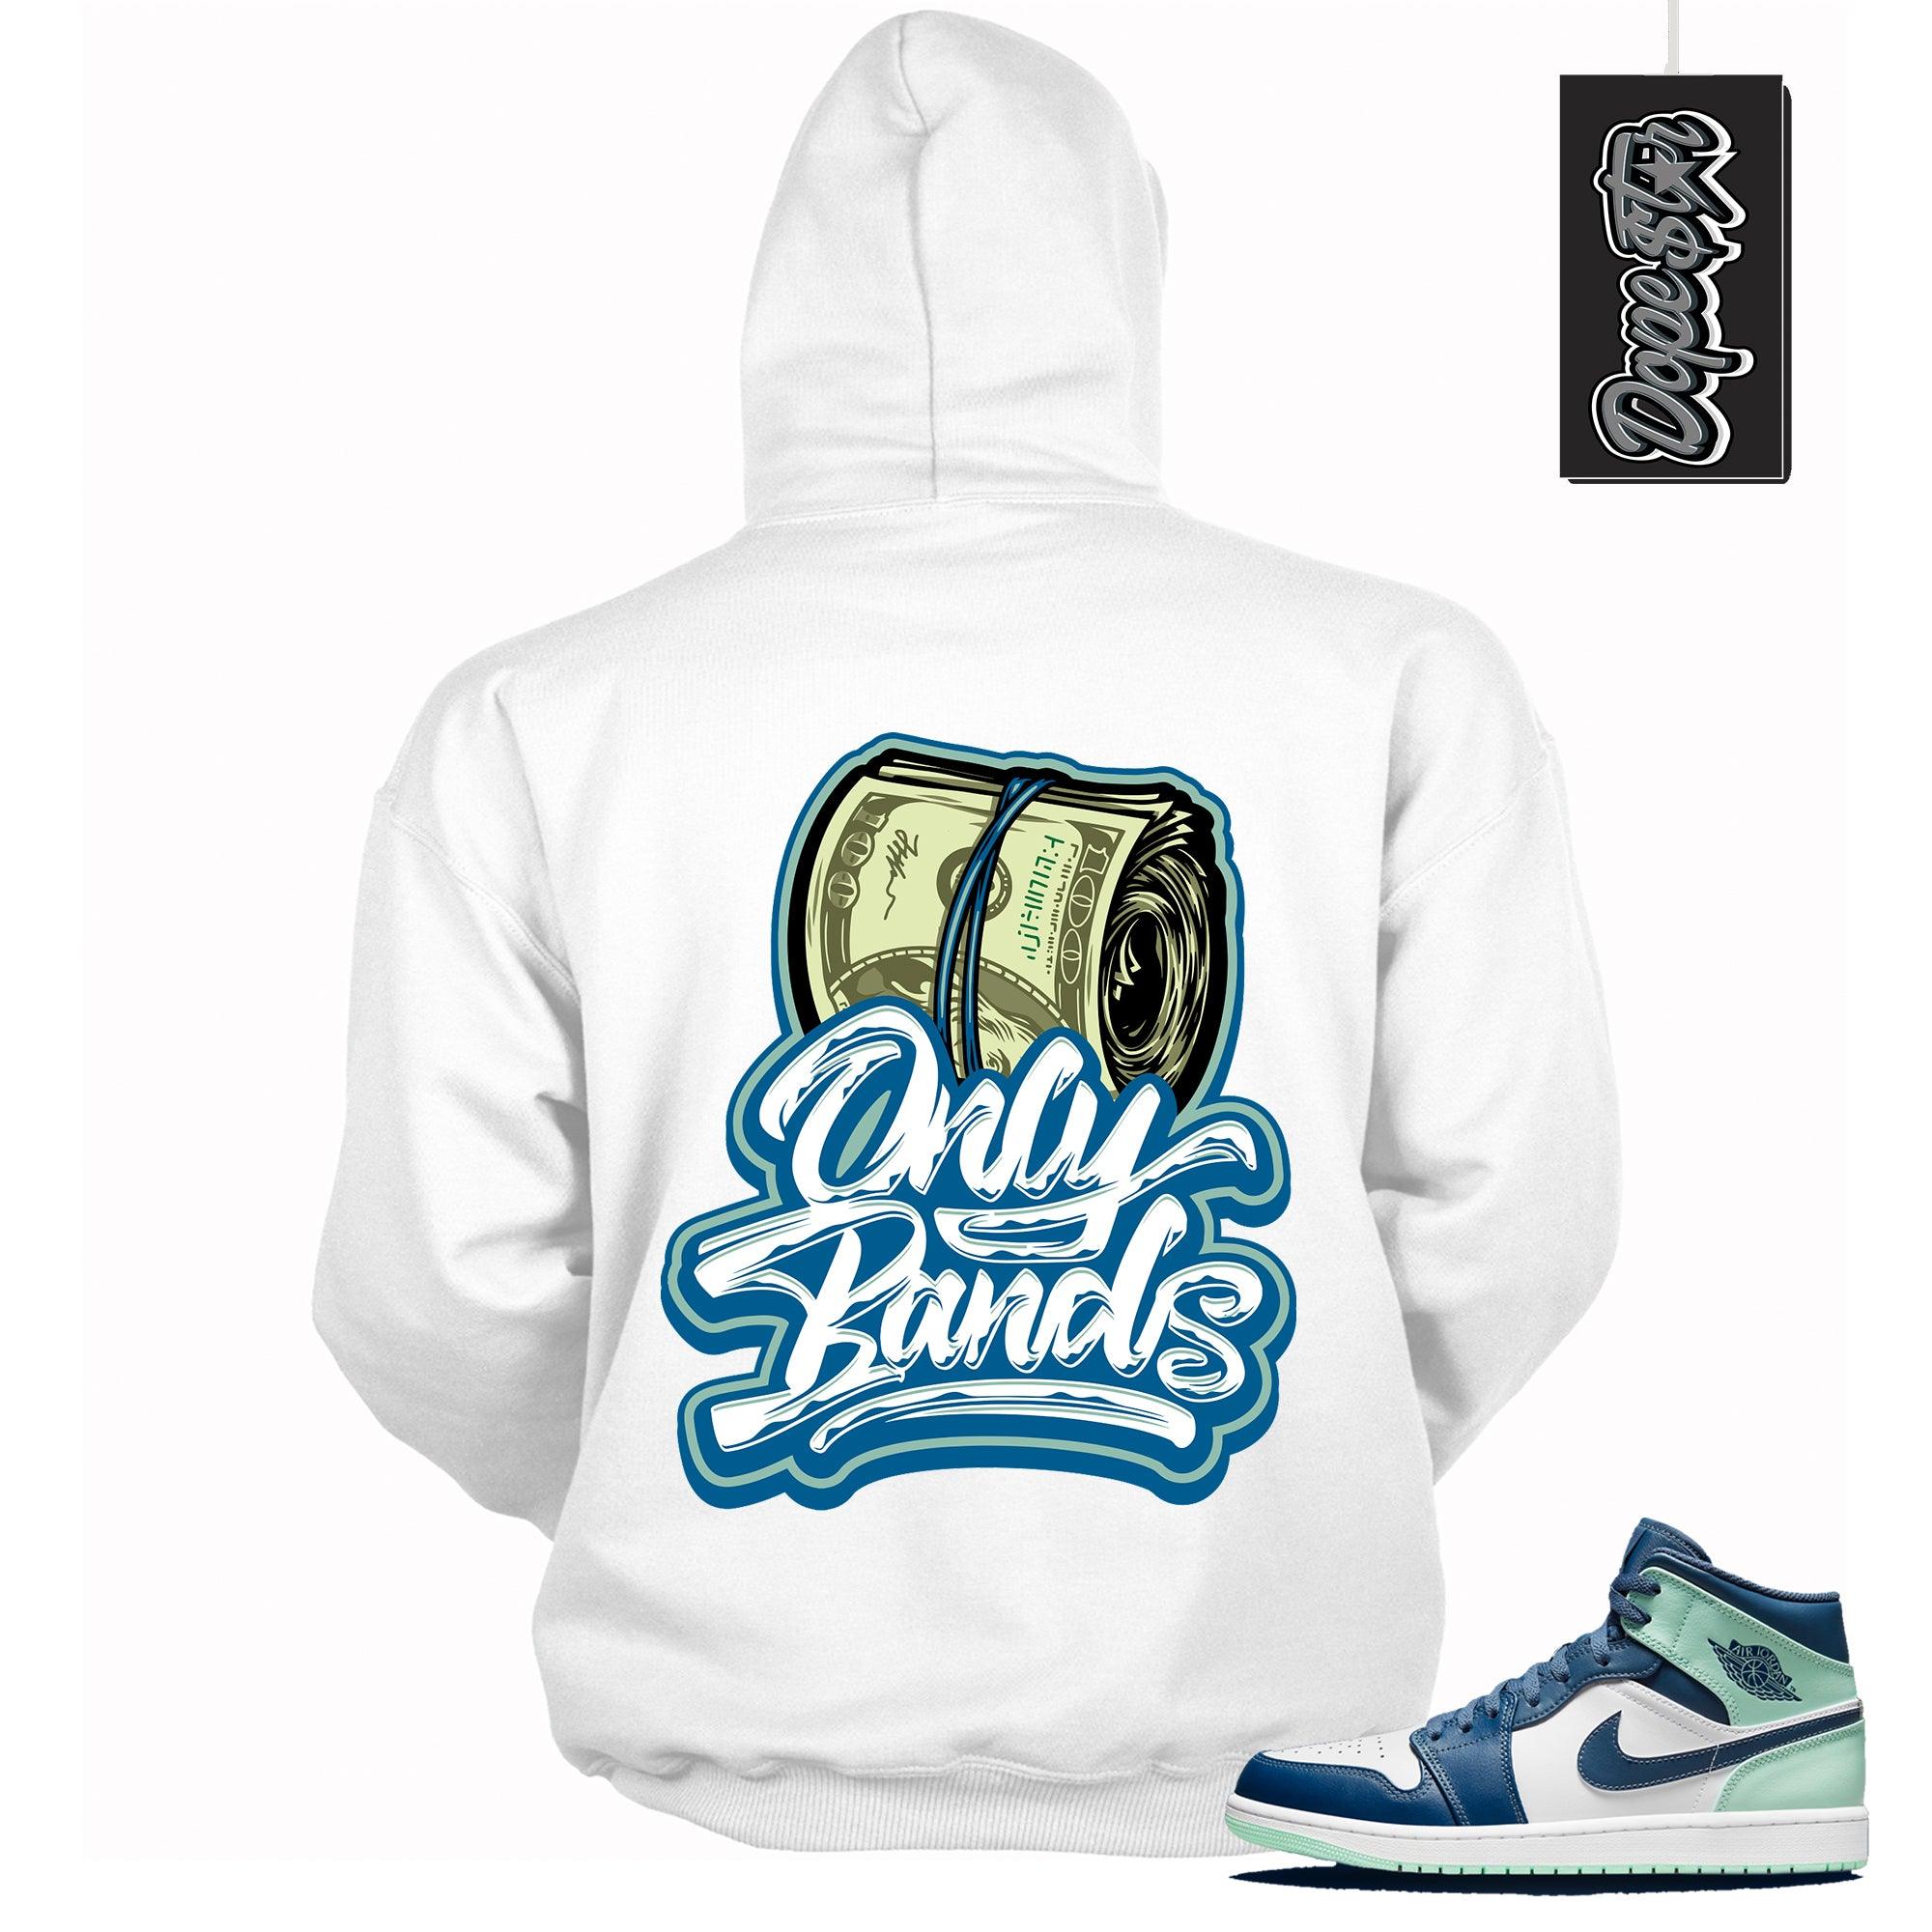 Only Bands Hoodie AJ 1 Mid Mystic Navy Mint Foam photo